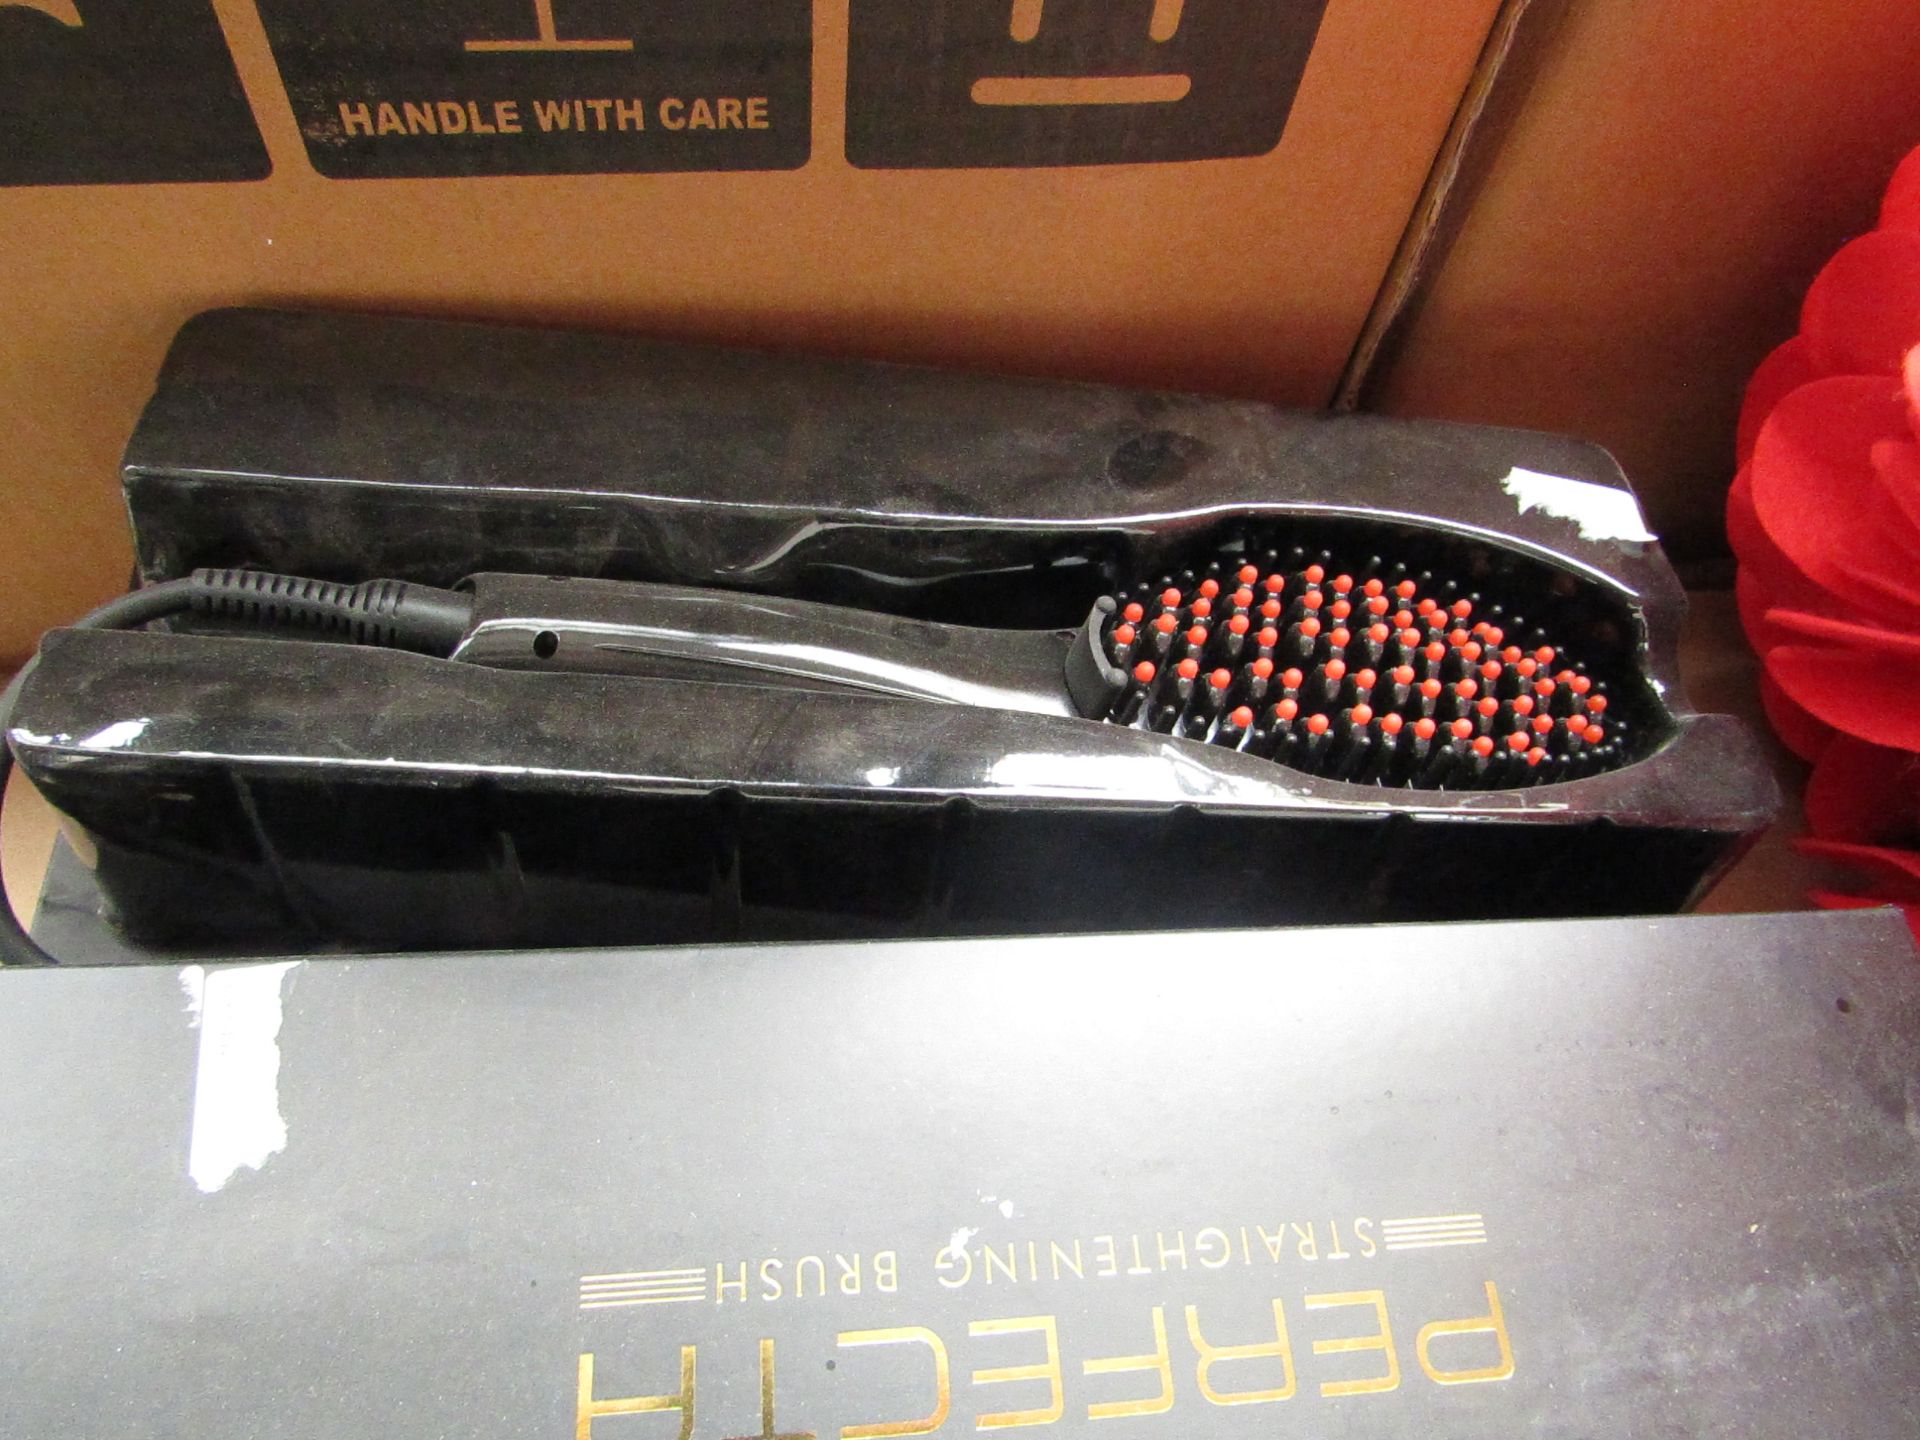 5x Perfecta hair straightening brush, unchecked and boxed. Euro Plug